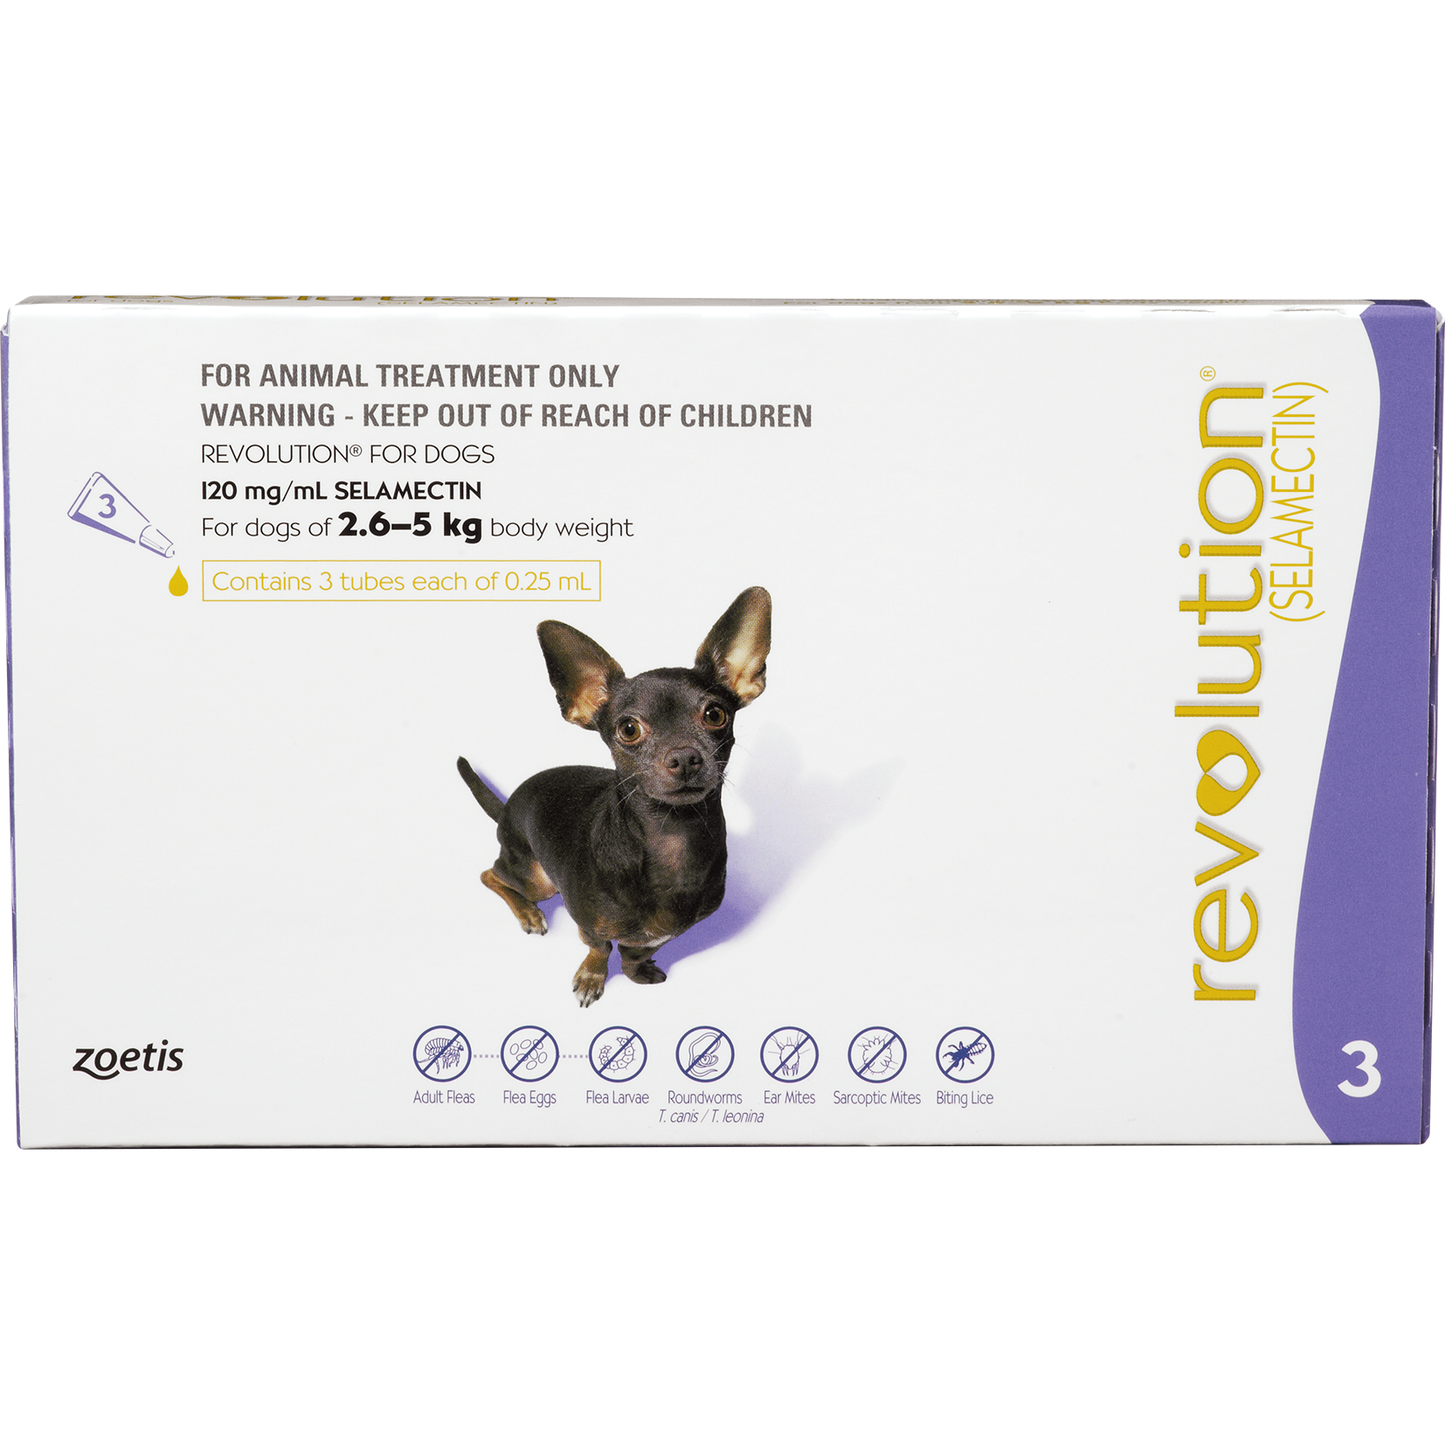 Revolution for X Small Dogs (2 .5-5kg)